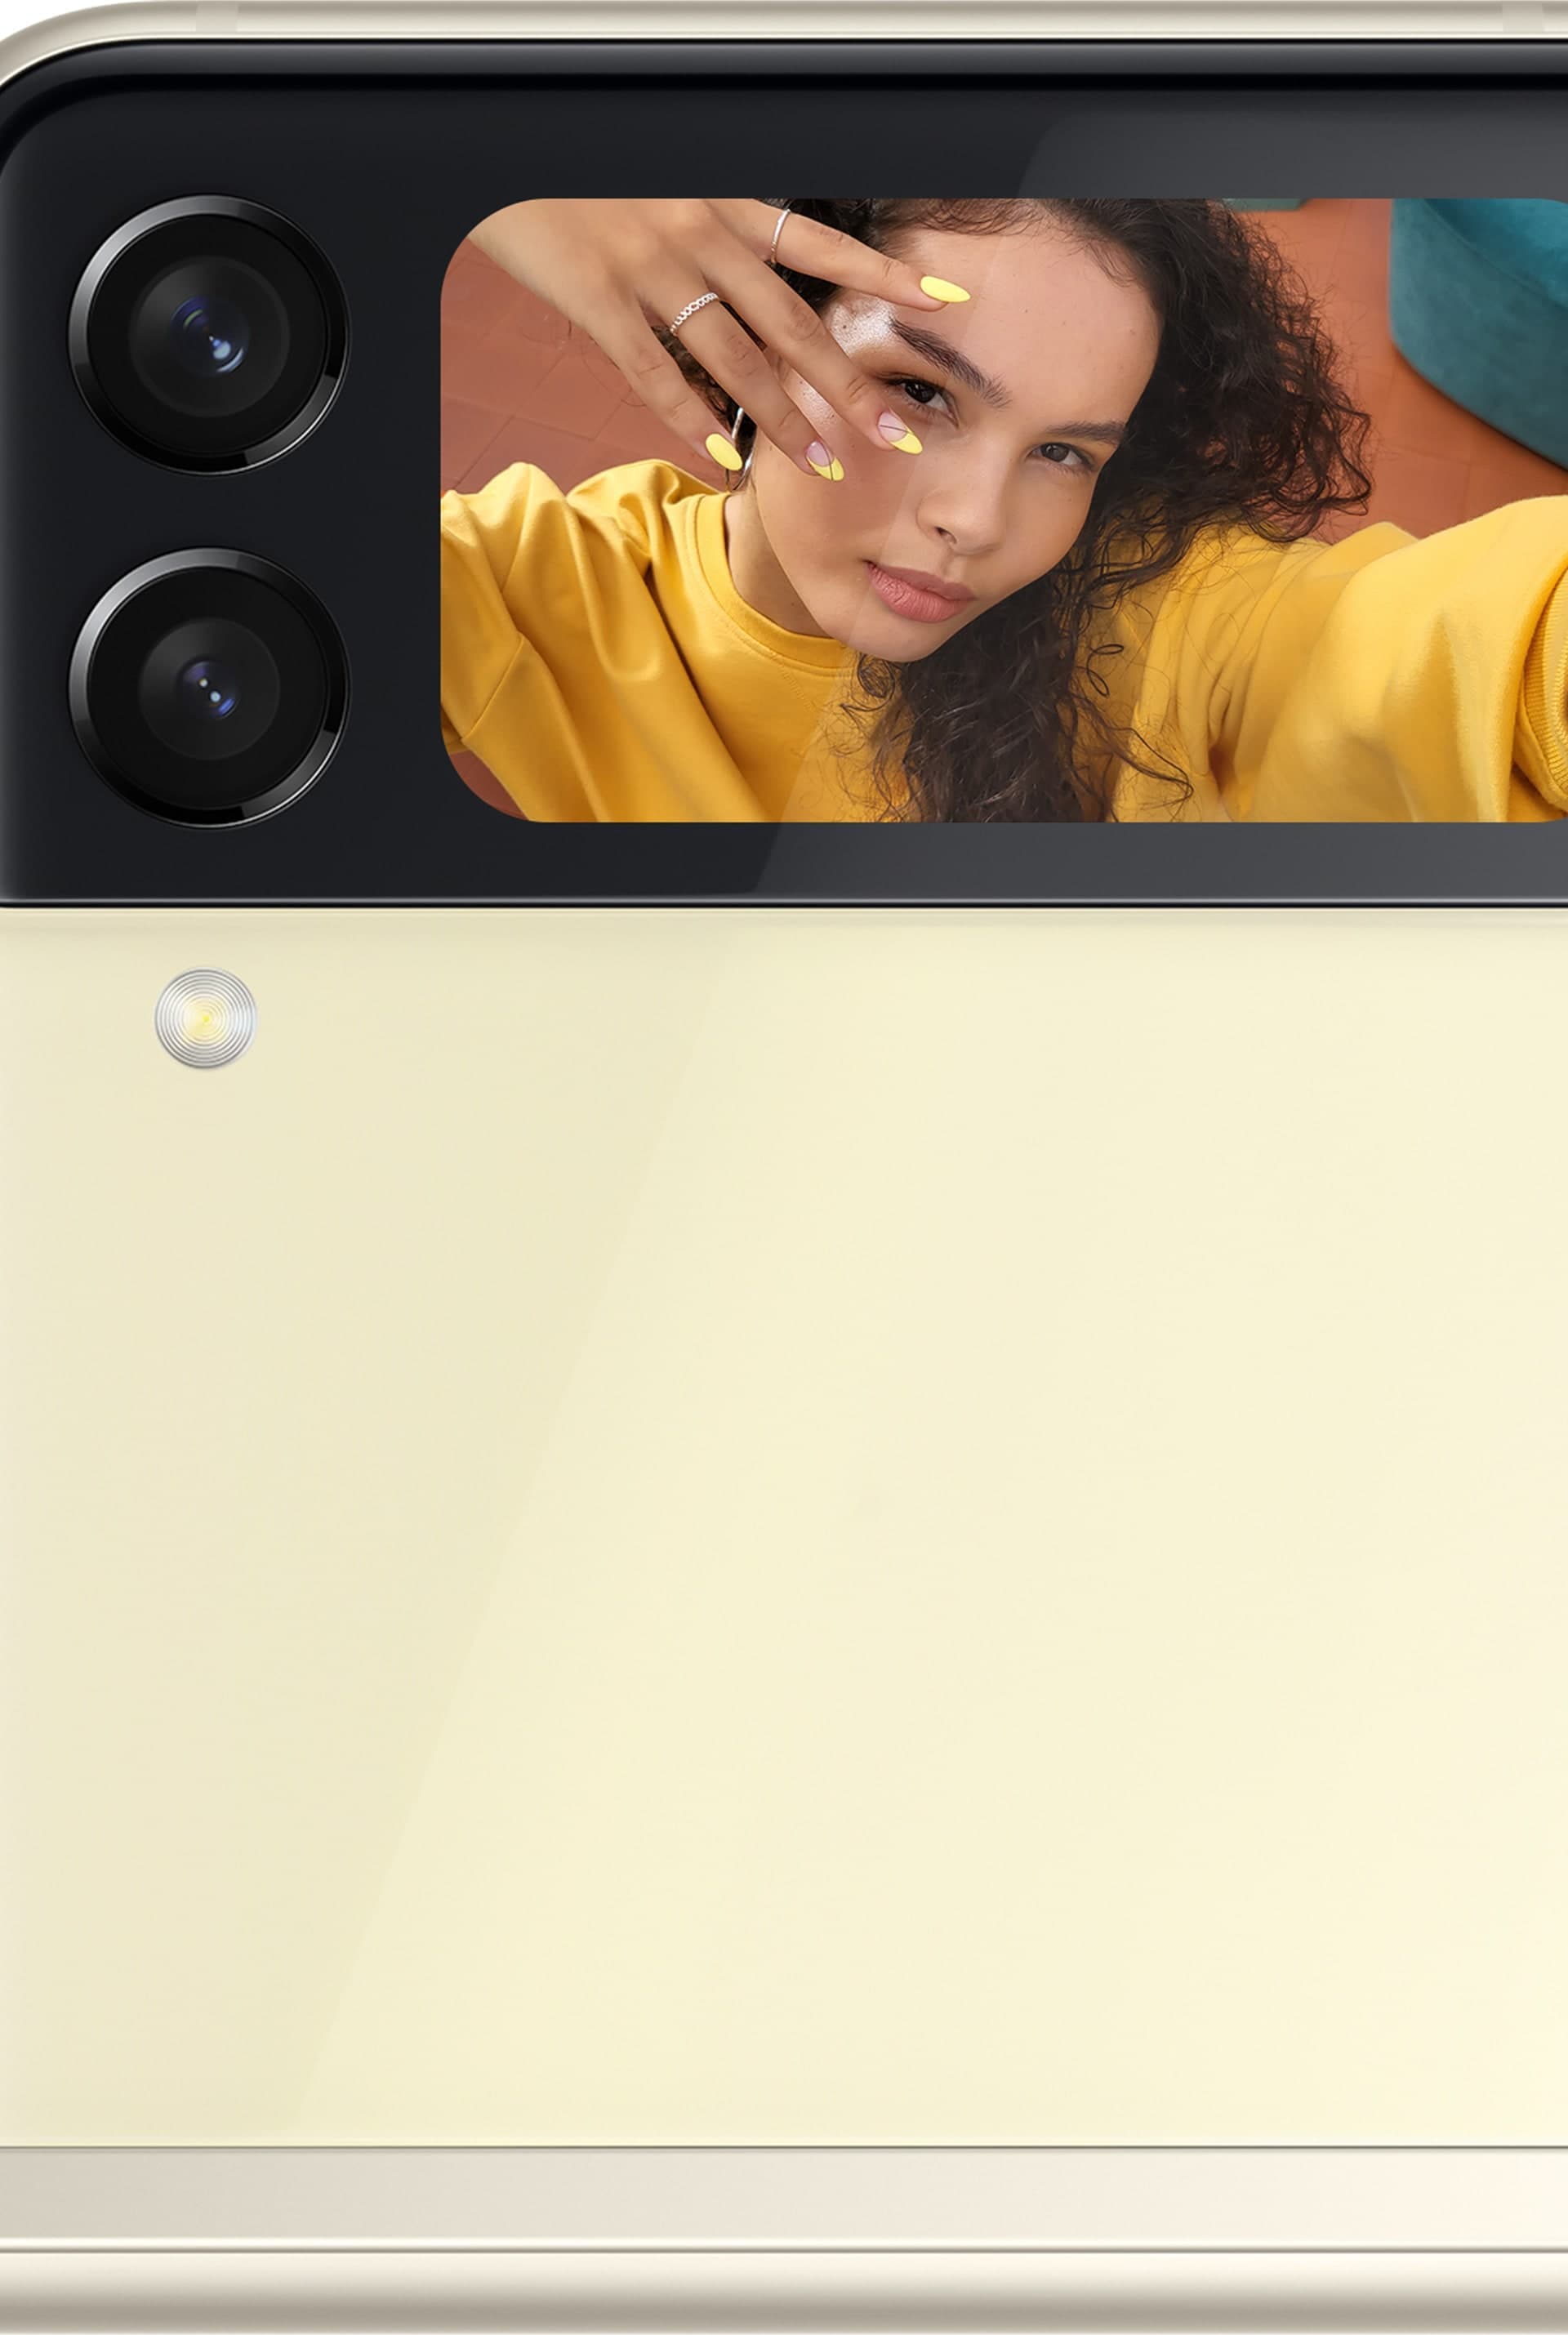 The Front Cover of Galaxy Z Flip3 5G with a woman taking a selfie shown in the Cover Screen.